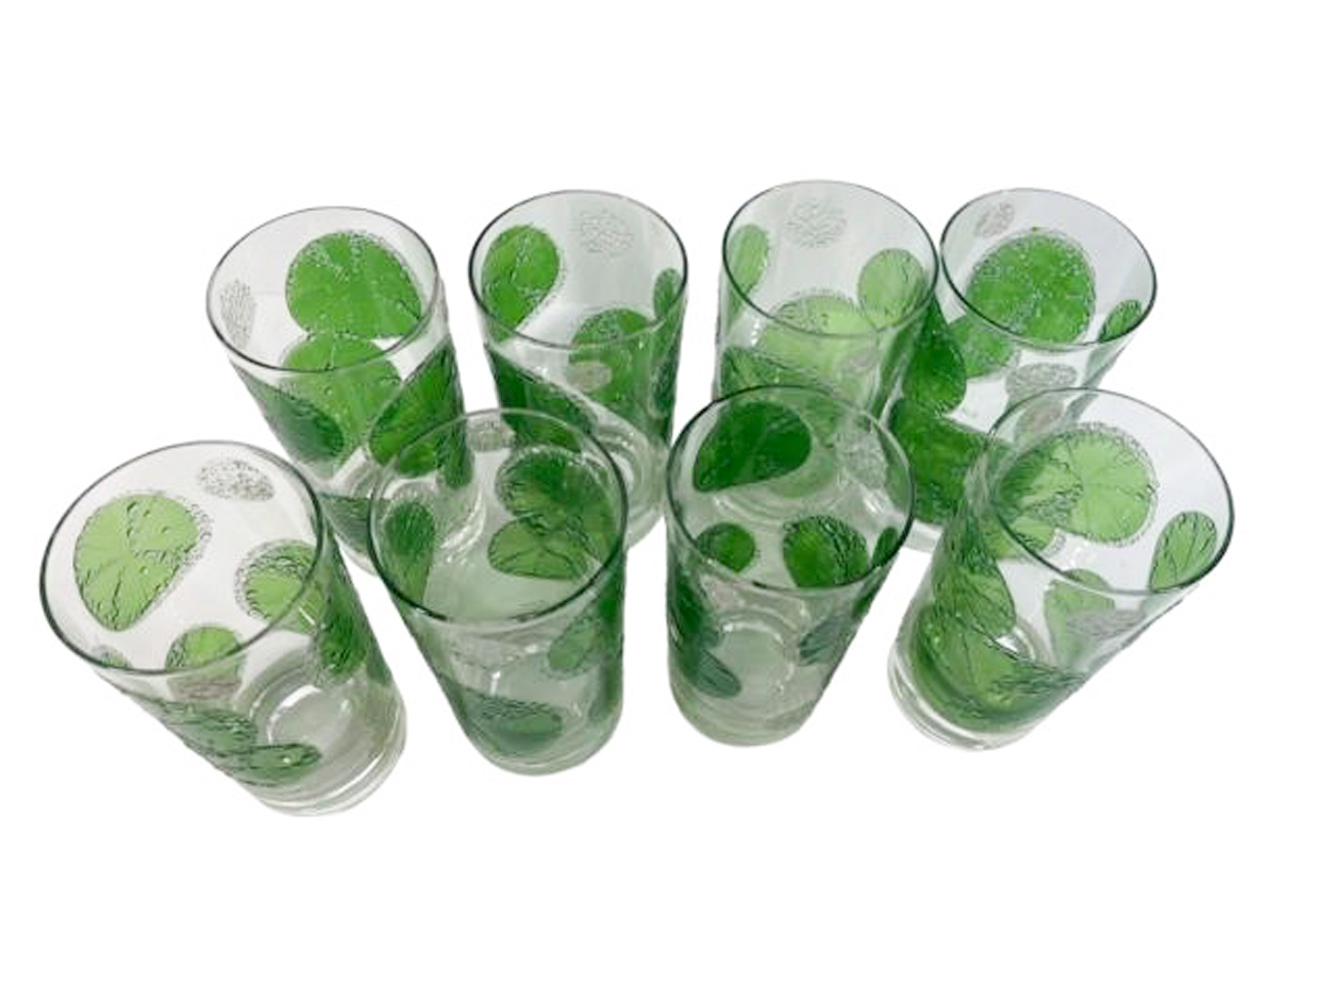 Vintage set of 8 Fred Press glasses with translucent green lime slices embellished with raised beads of clear frosted edges resembling water beads and bubbles, together with a rectangular handled caddy with a gold-toned finish.